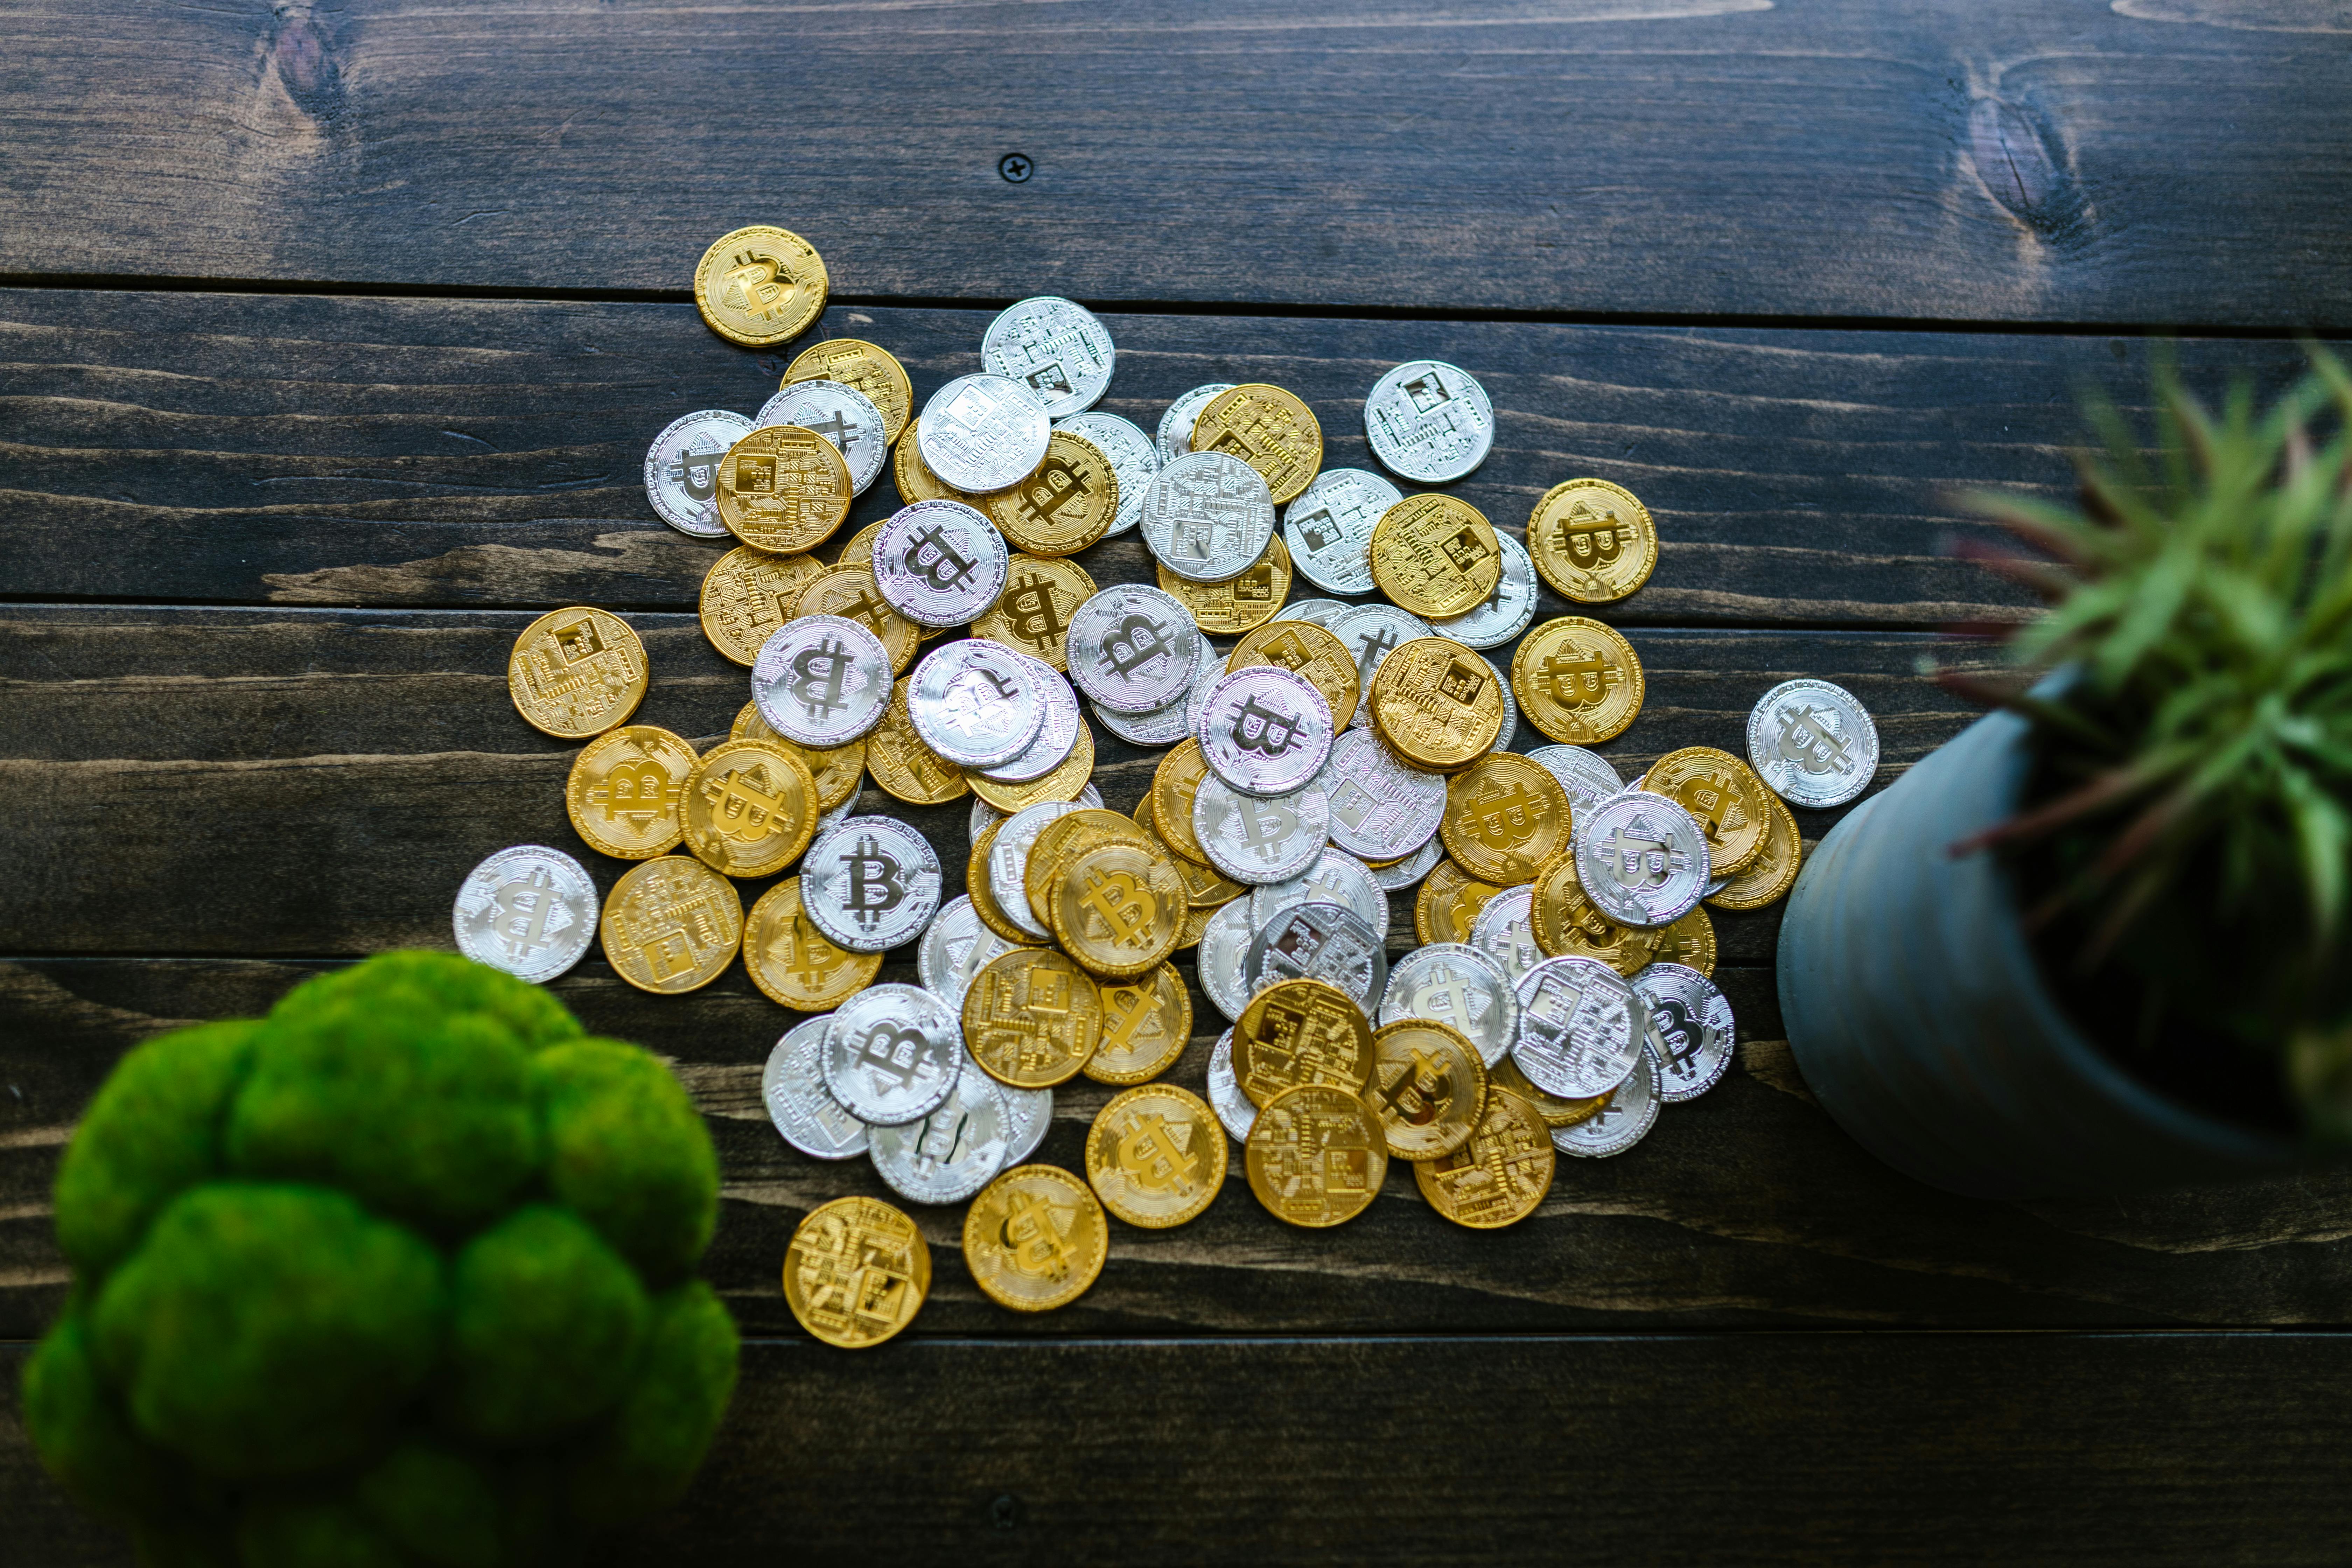 silver and gold round coins on wooden surface